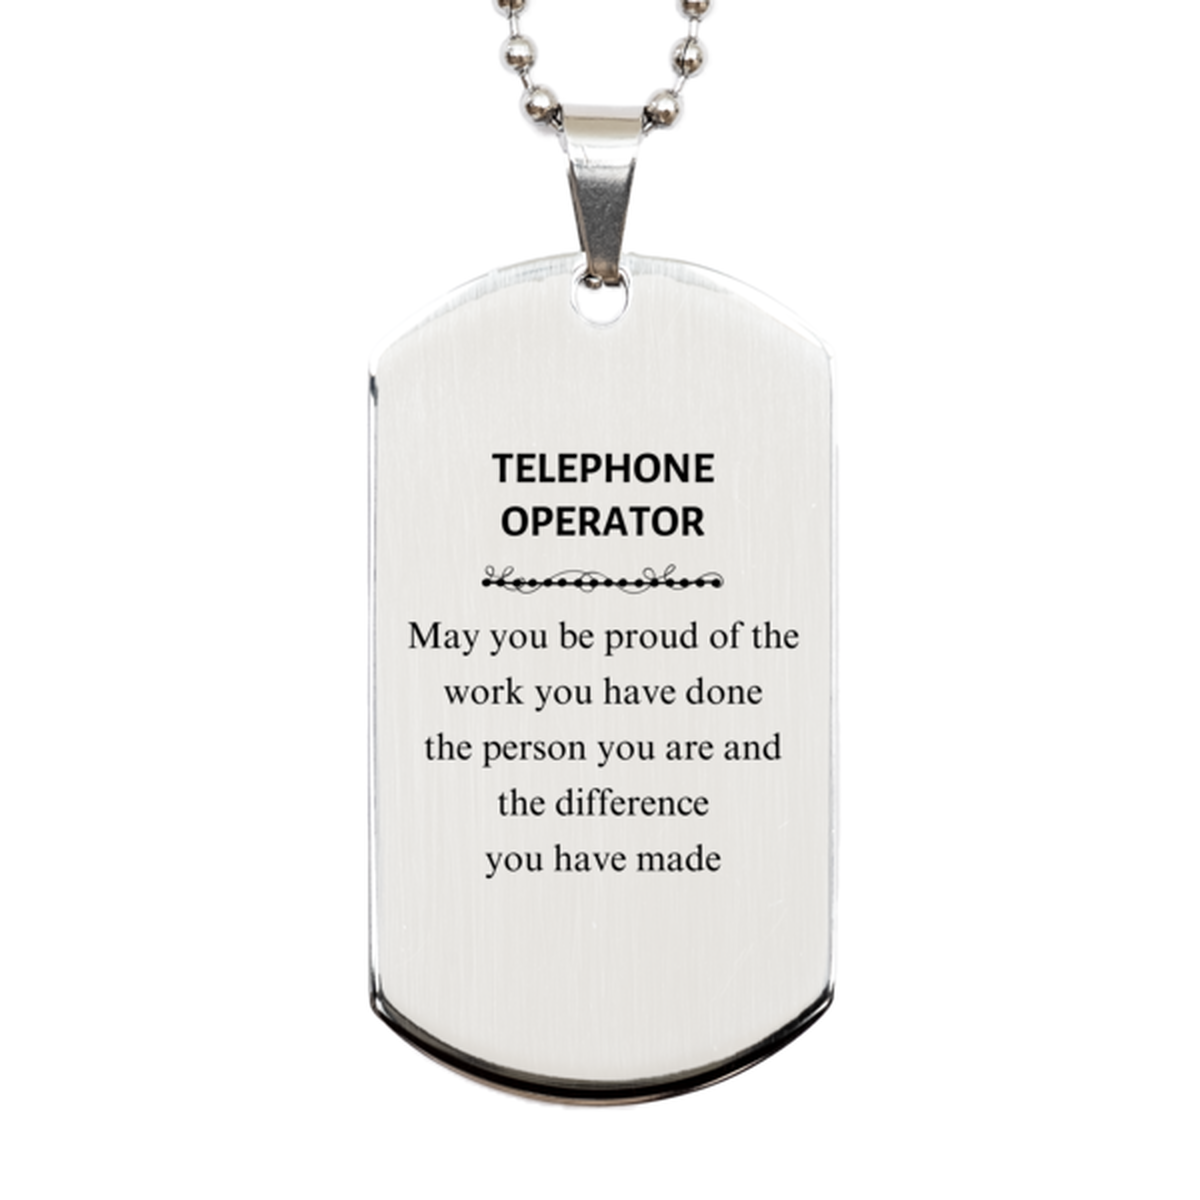 Telephone Operator May you be proud of the work you have done, Retirement Telephone Operator Silver Dog Tag for Colleague Appreciation Gifts Amazing for Telephone Operator